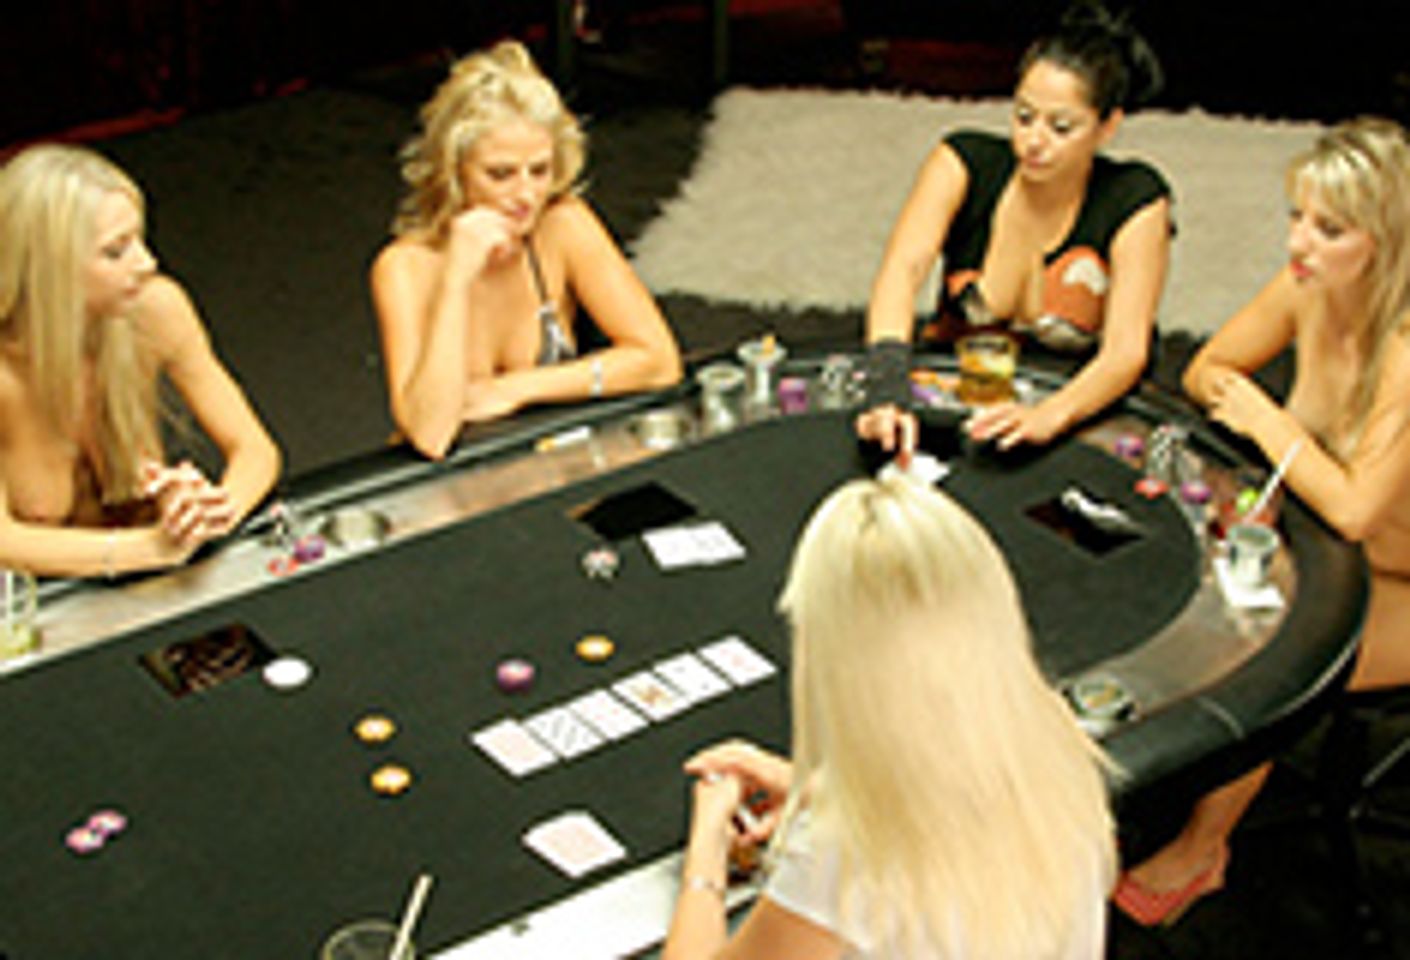 Segments of ‘Party Girl Poker’ Hit the Web